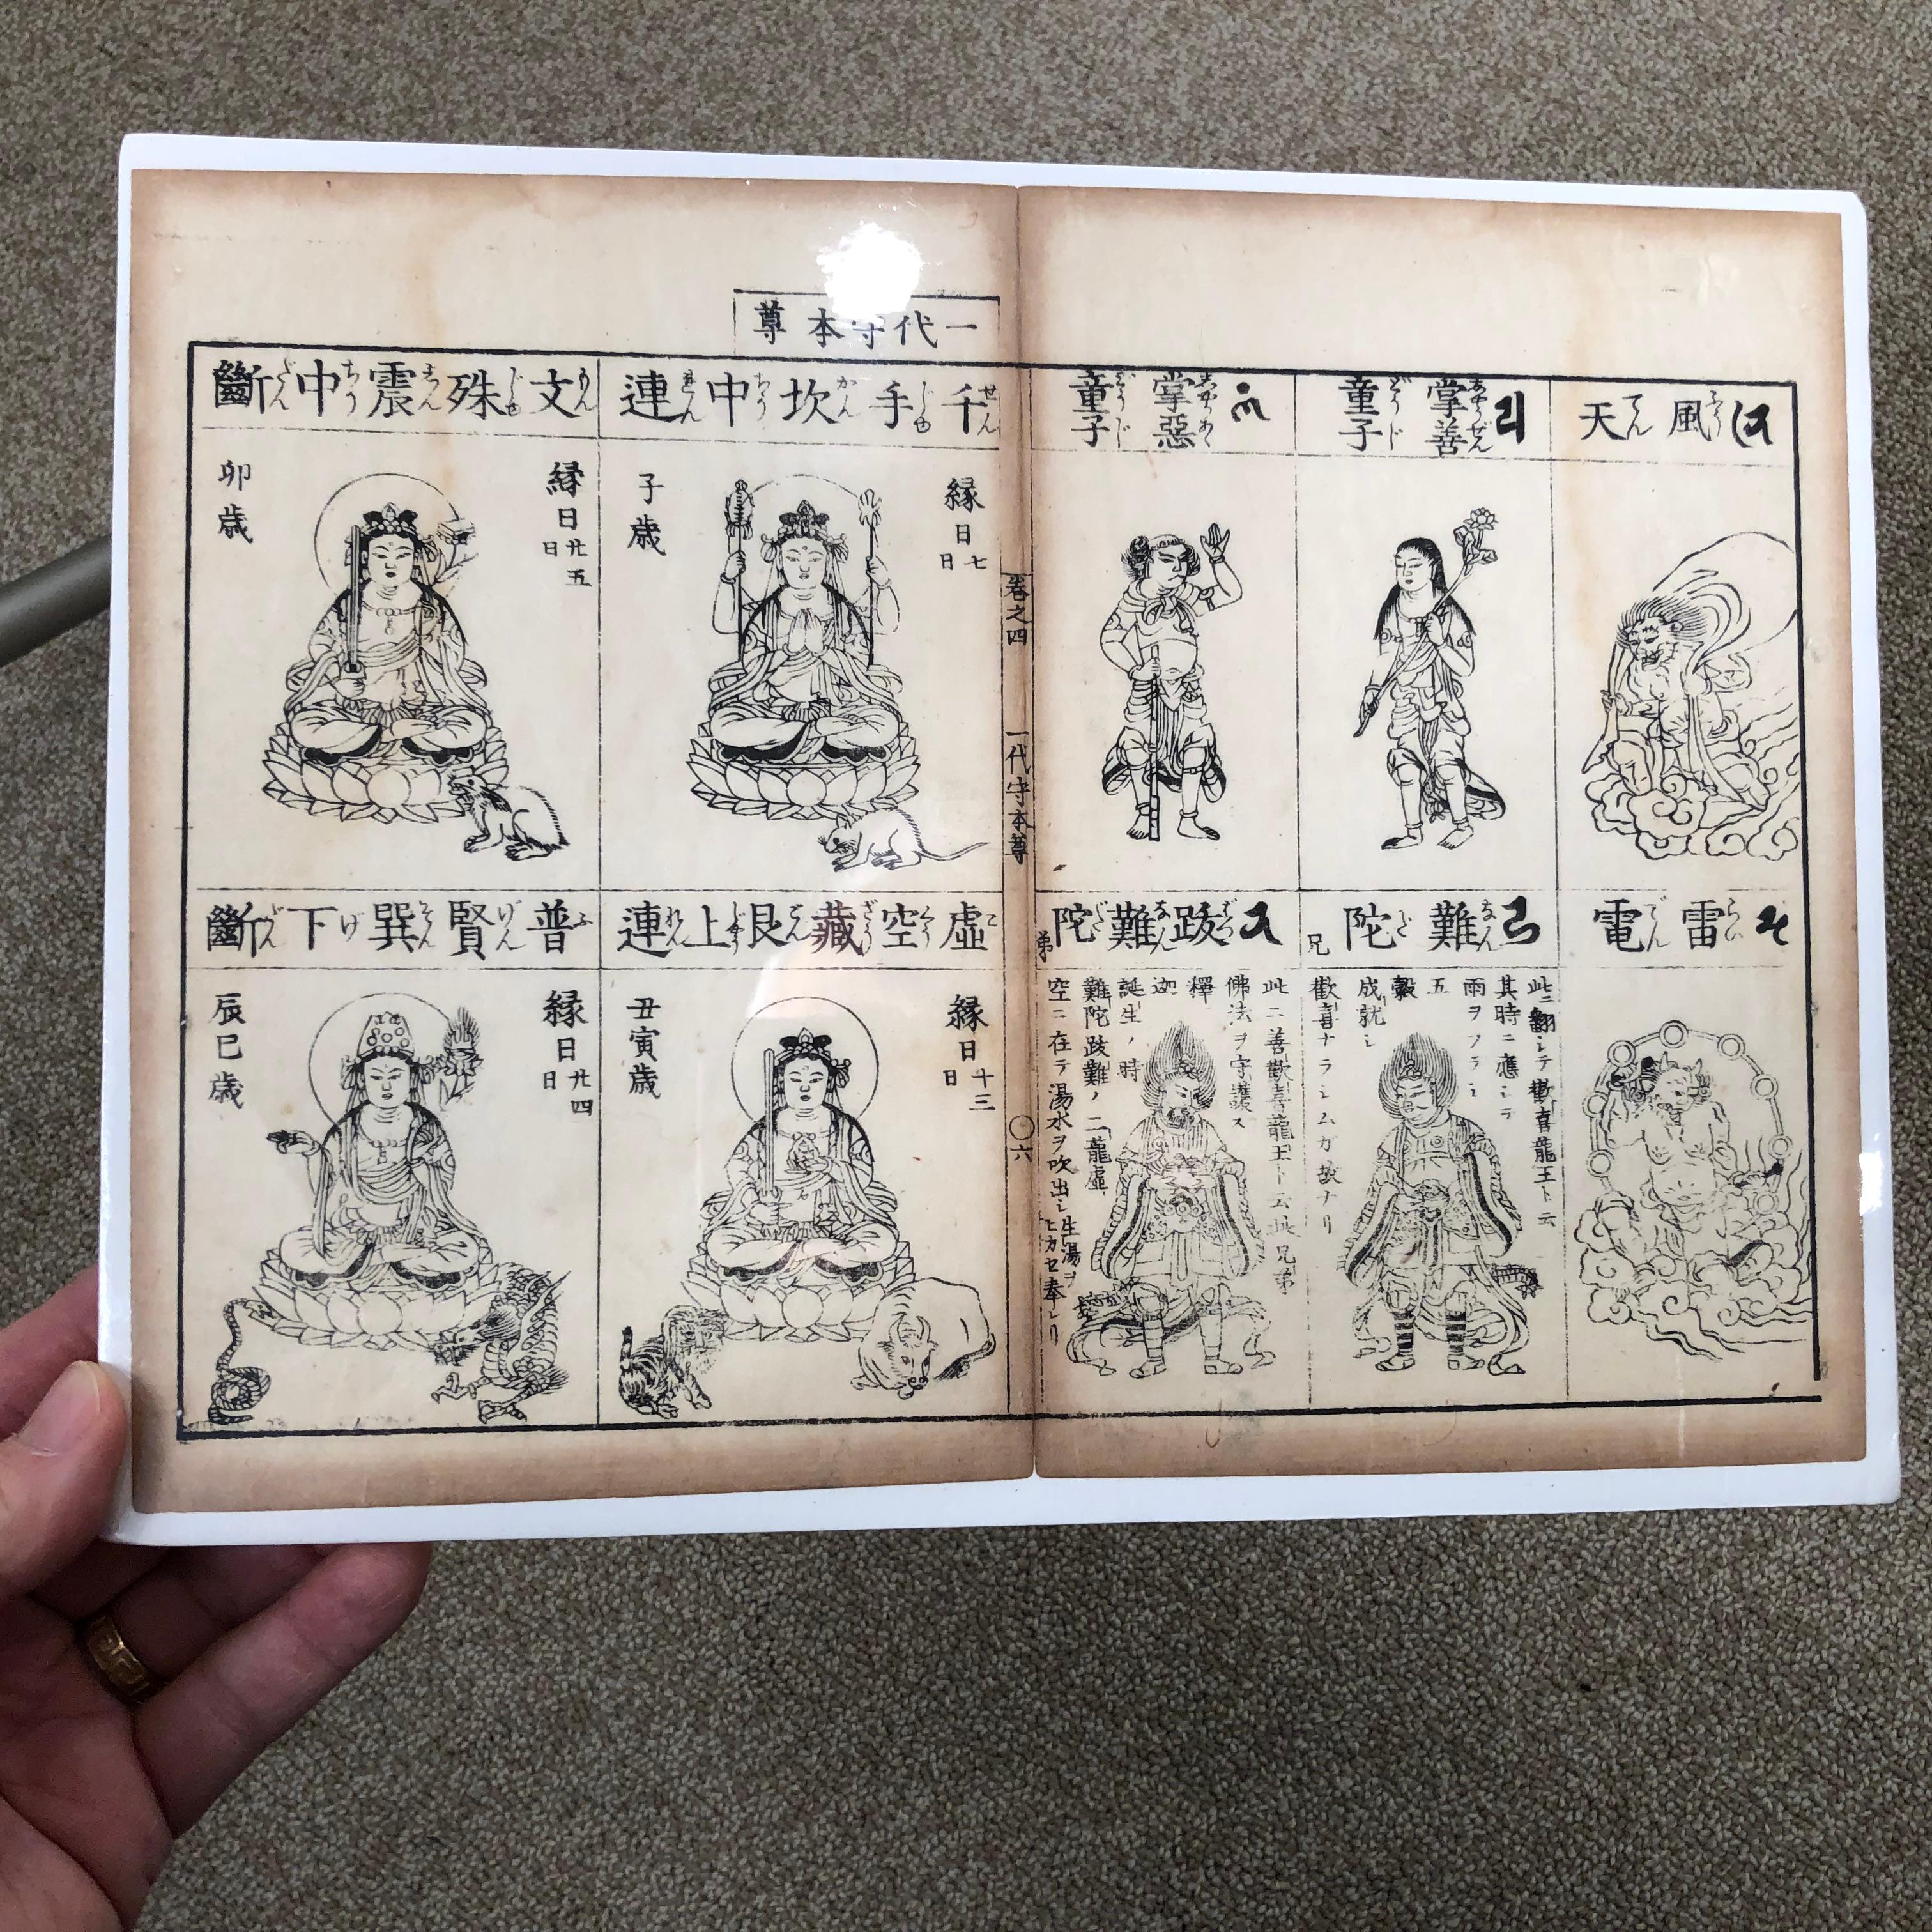 Japanese four antique Buddha woodblock prints from an original 1796 book, immediately frameable #1

Dated to Kansei 8 (1796) originally found in Tokyo, Japan 

These rare woodblock printed double leaves illustrate Buddha, Buddhist, and Kanon